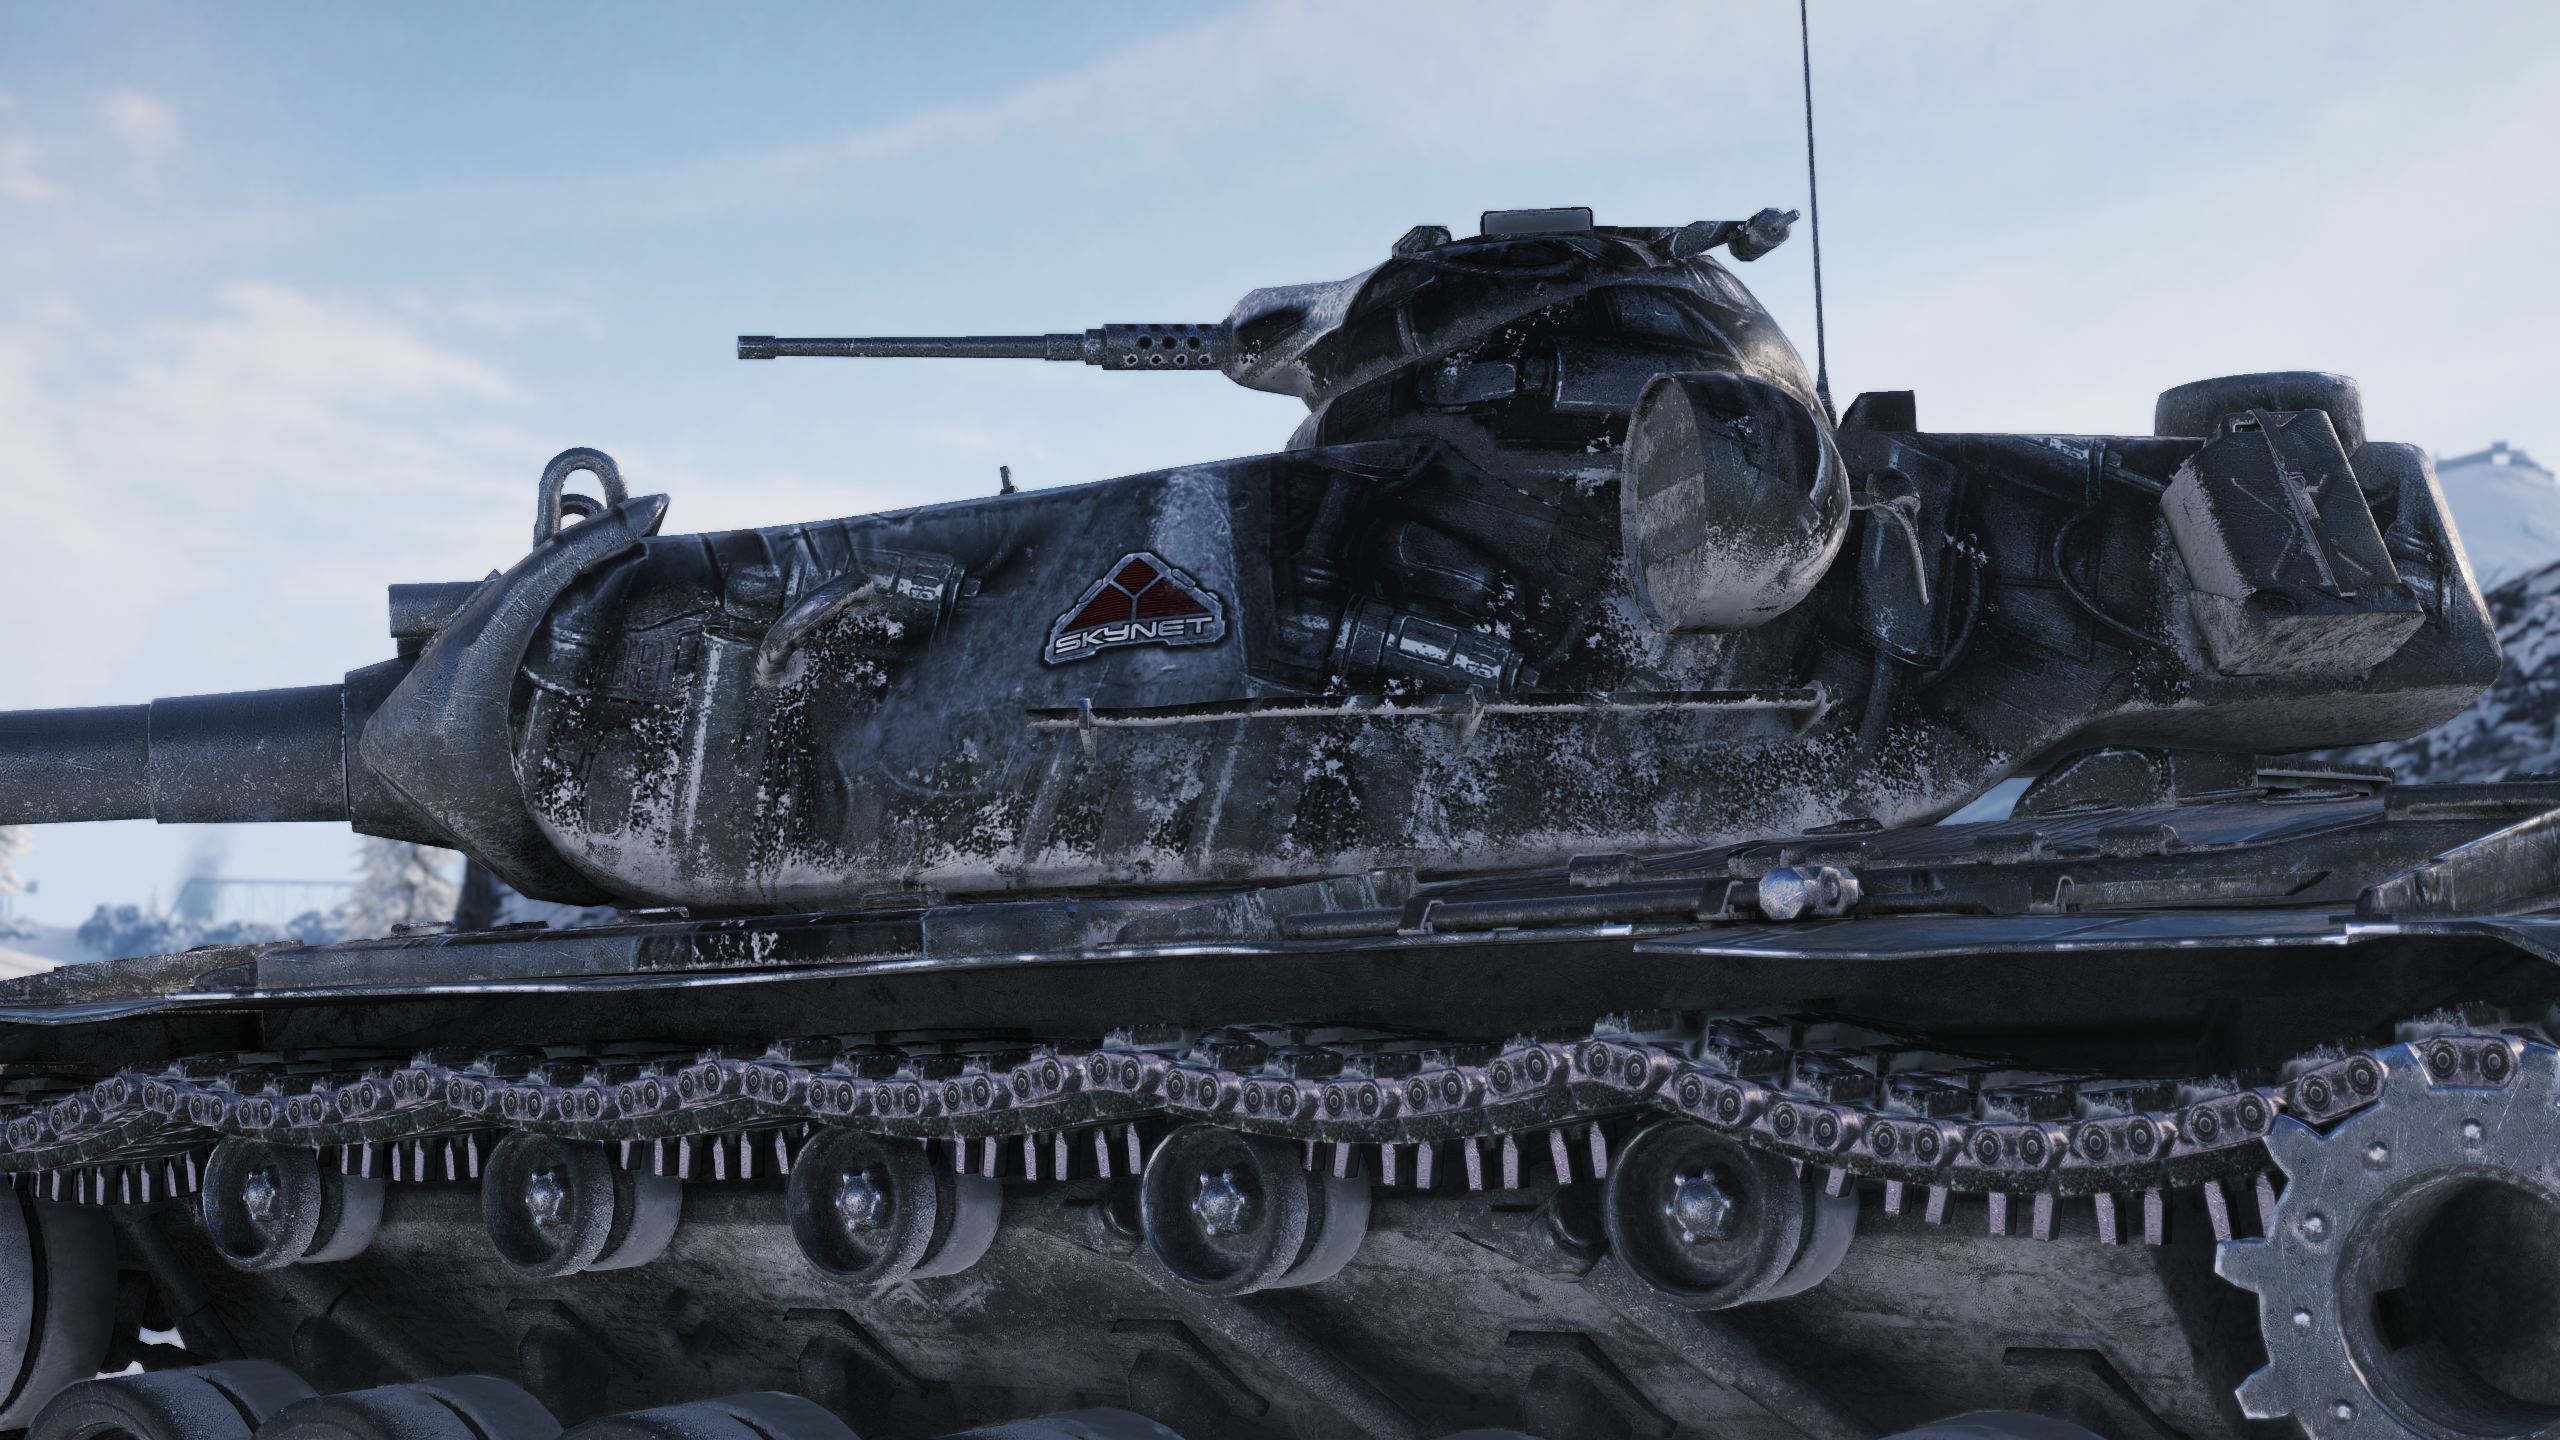 Terminator 2 in World of Tanks - Battle Pass Special: Judgment Day!